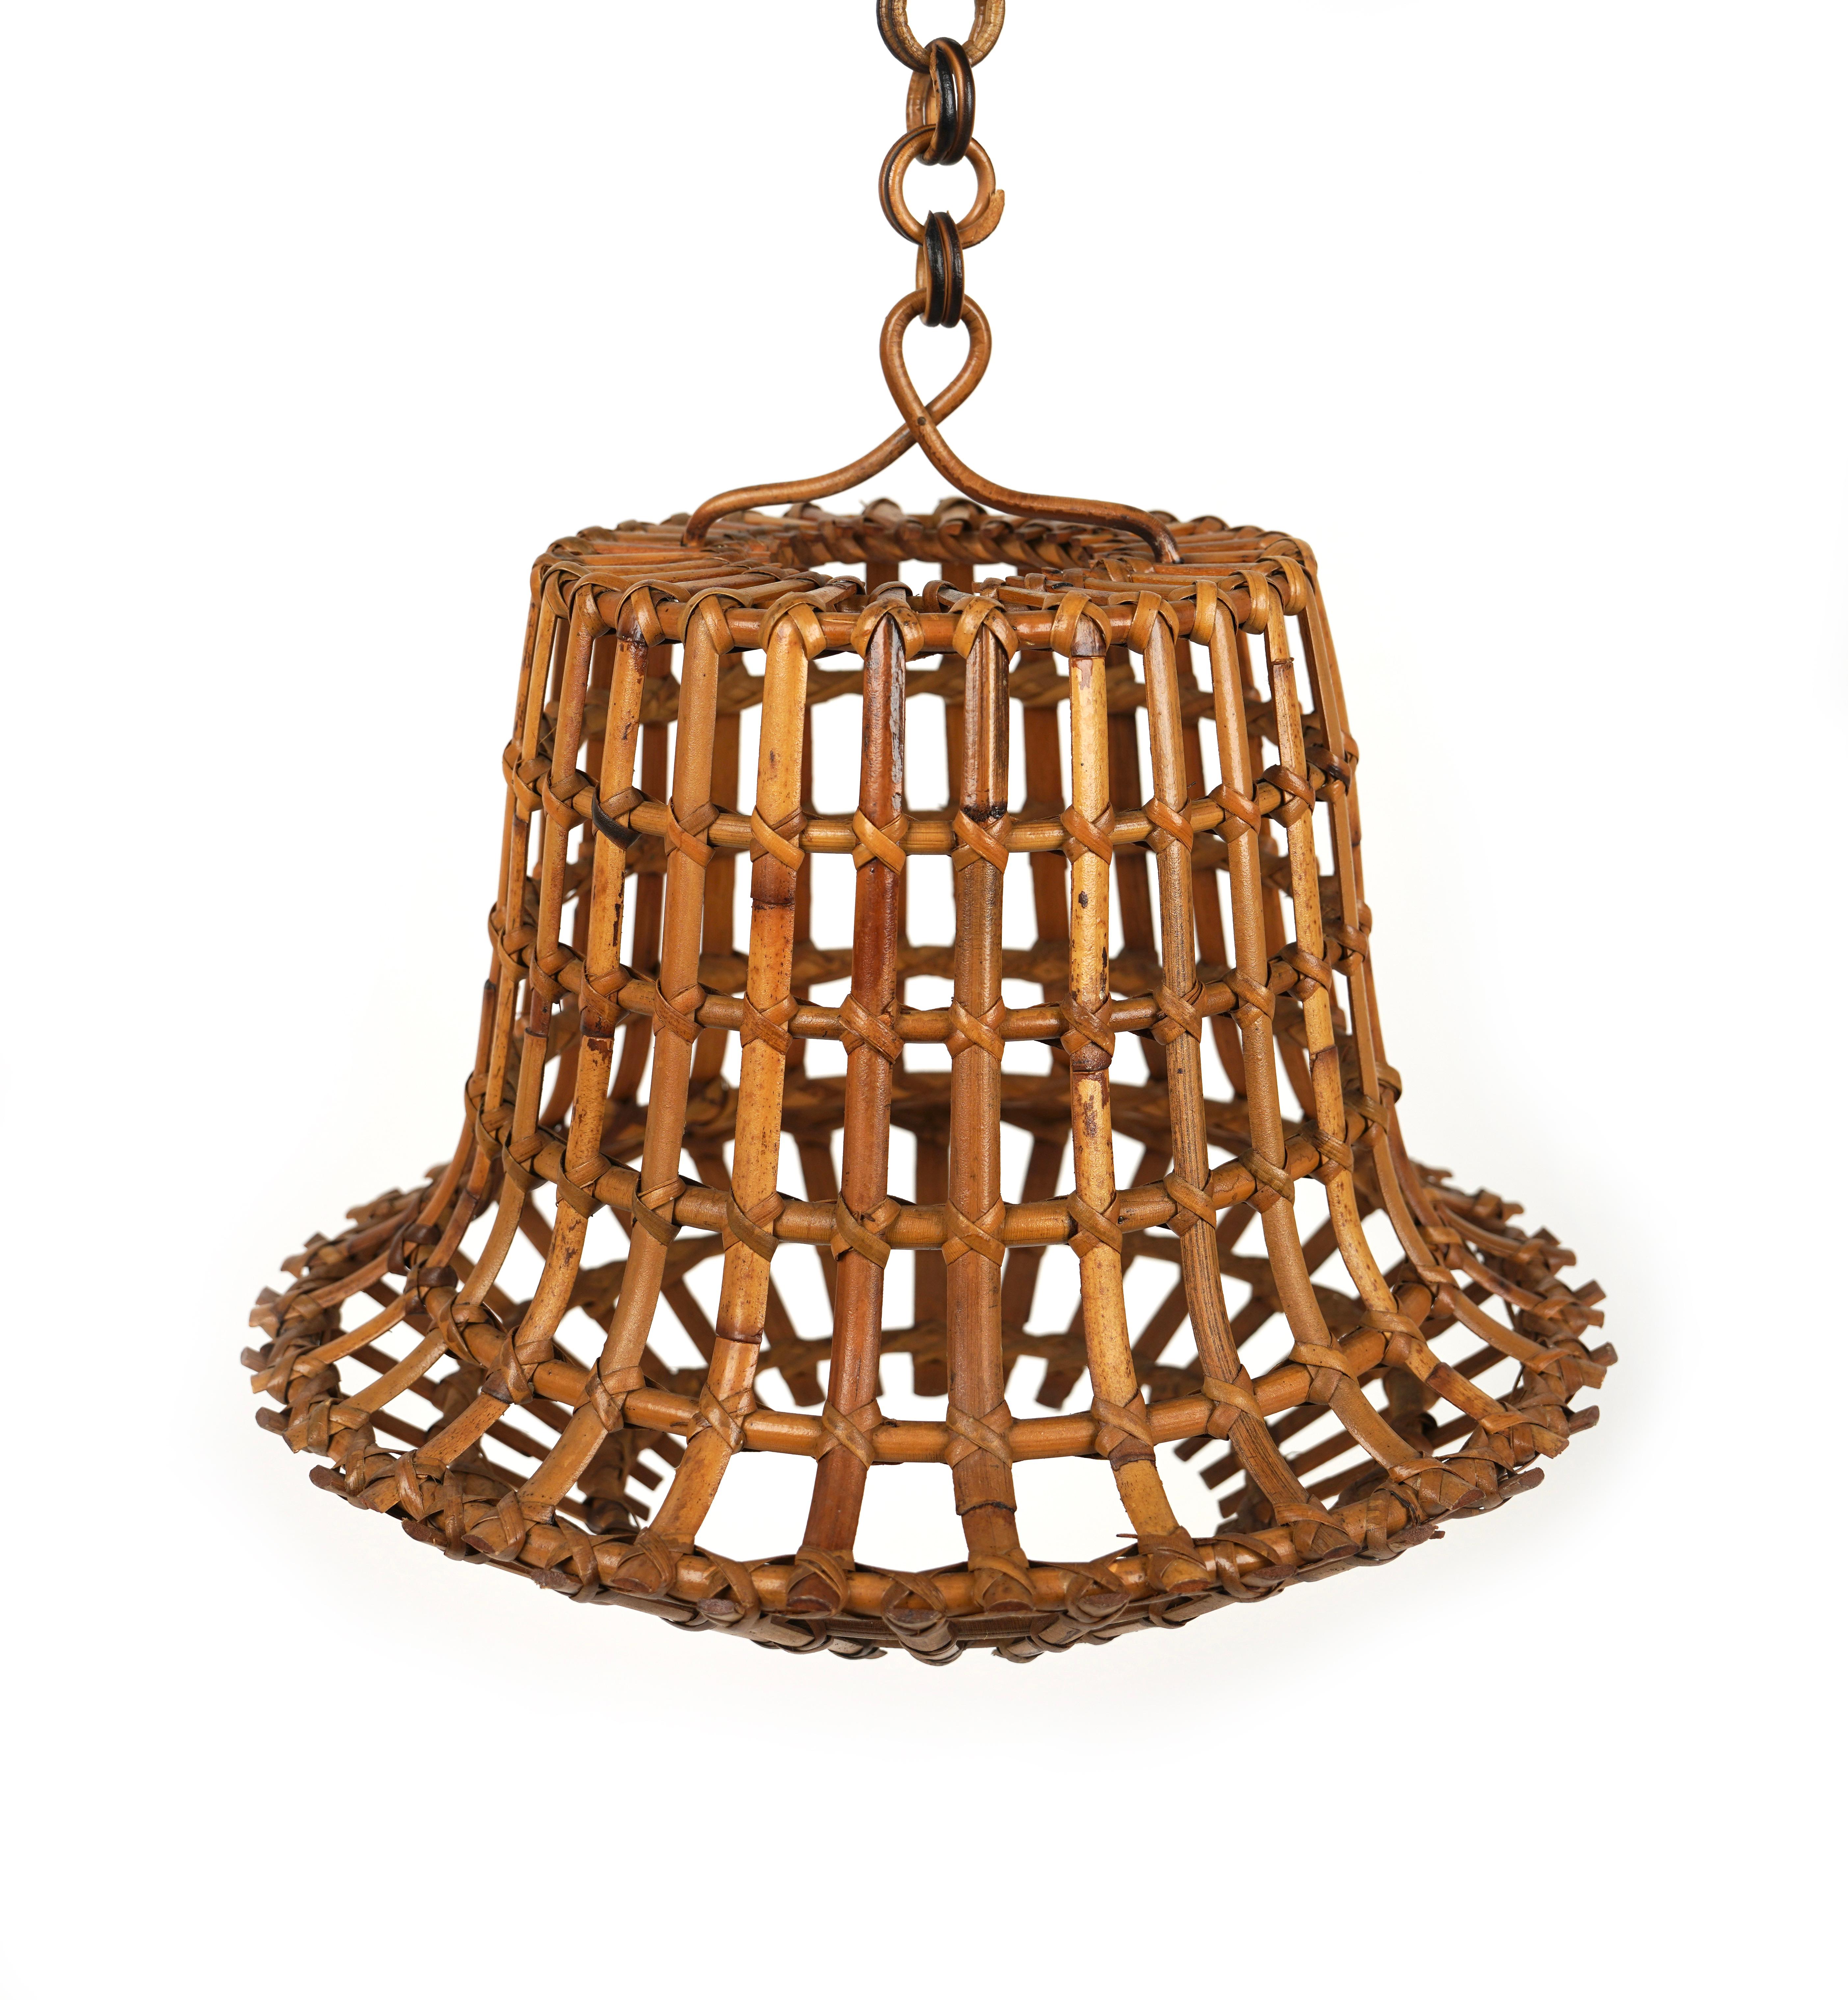 Midcentury Bamboo and Rattan Chandelier Louis Sognot Style, Italy 1960s For Sale 3